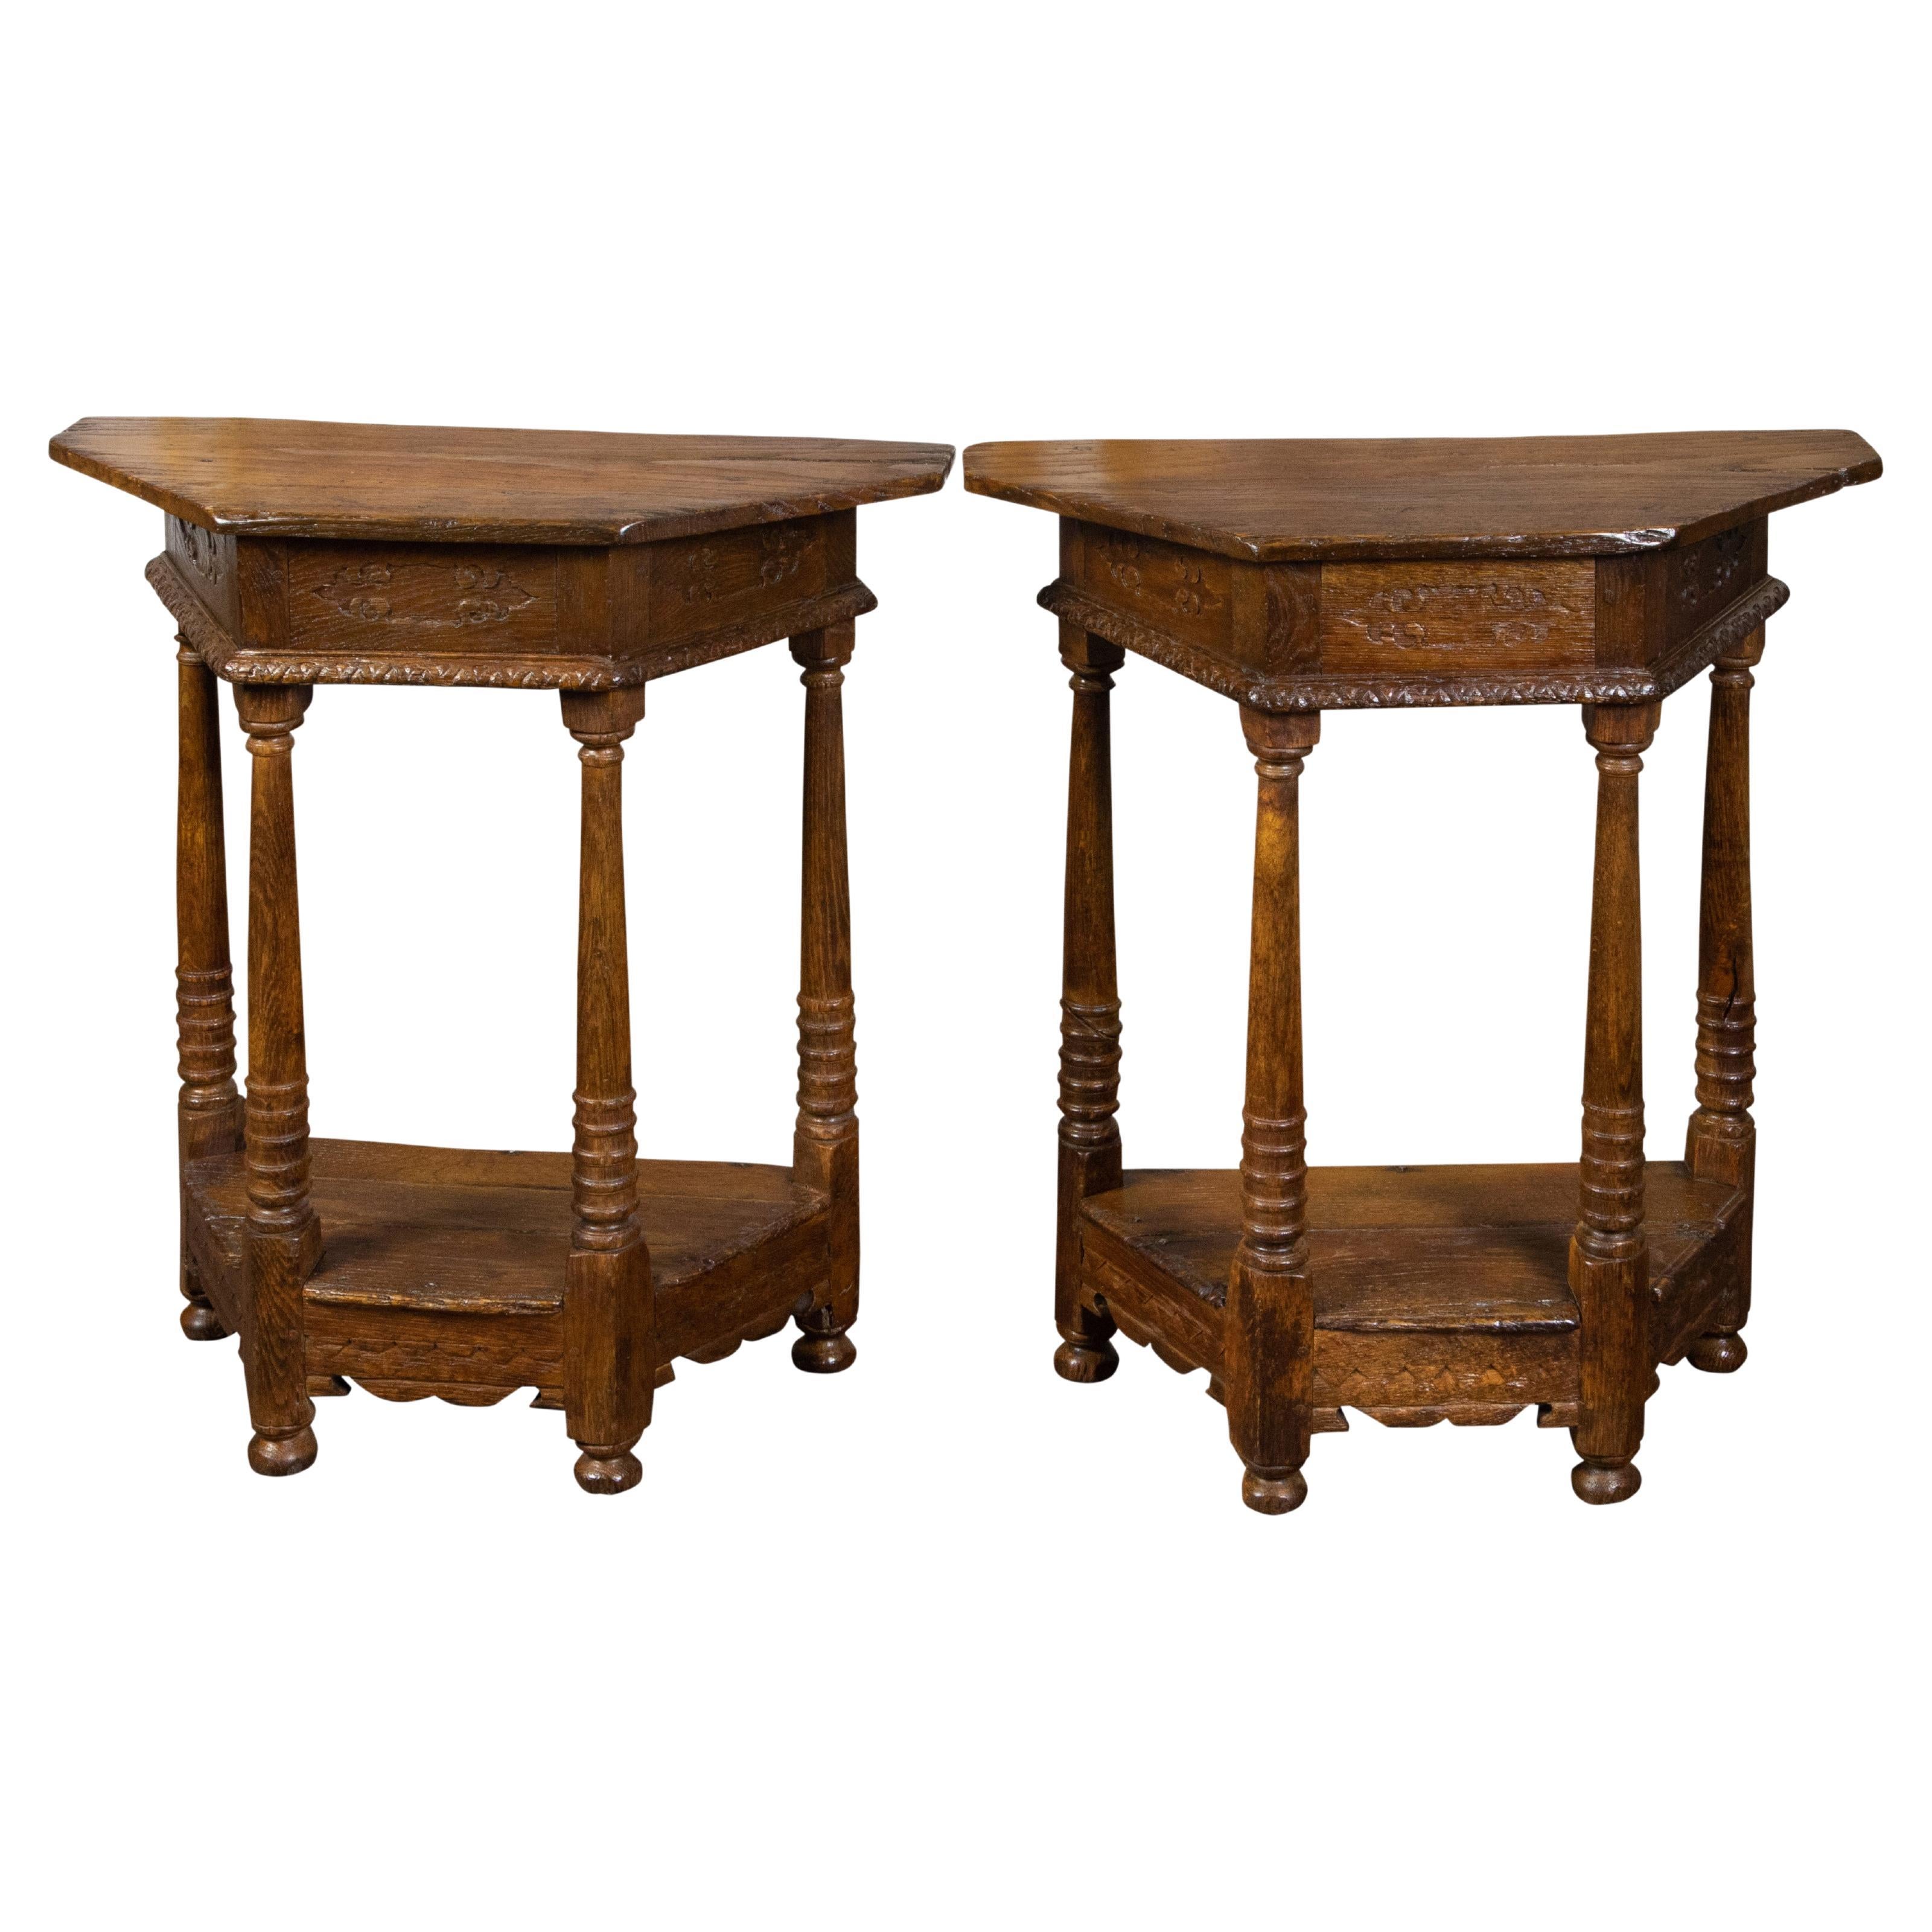 Pair of 19th Century English Carved Oak Demilune Tables with Column Legs For Sale